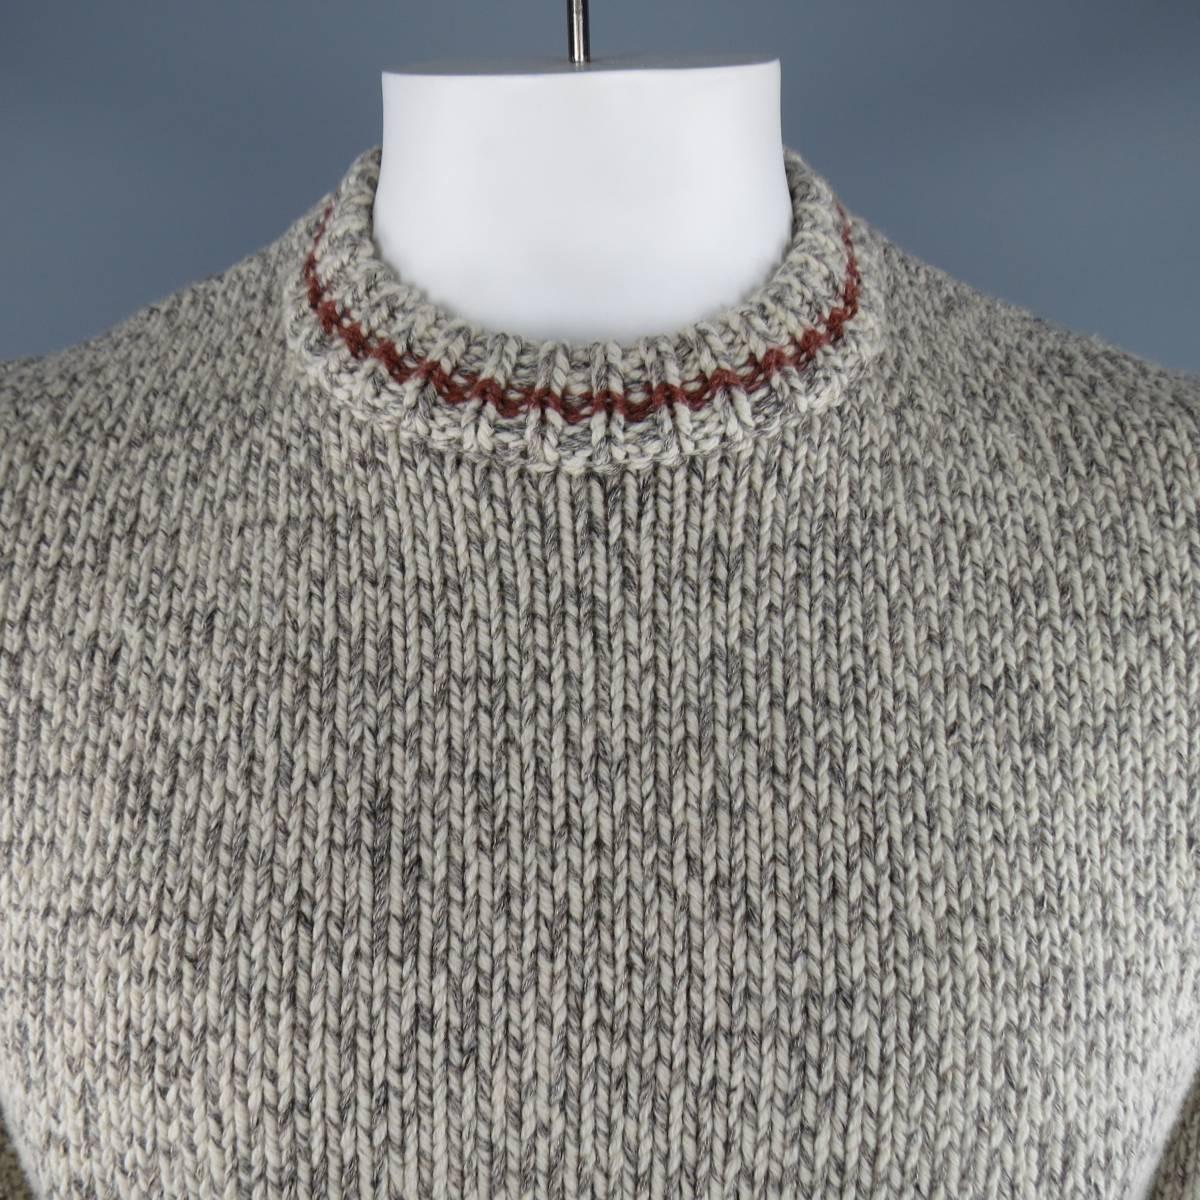 RRL by RALPH LAUREN Sweater consists of cotton/wool material in a cream color tone. Designed in a crew-neck collar, heather pattern with a heavy knit texture. Rib cuffs and hem.
 
Excellent Pre-Owned Condition
Marked Size: L
 
Measurements
